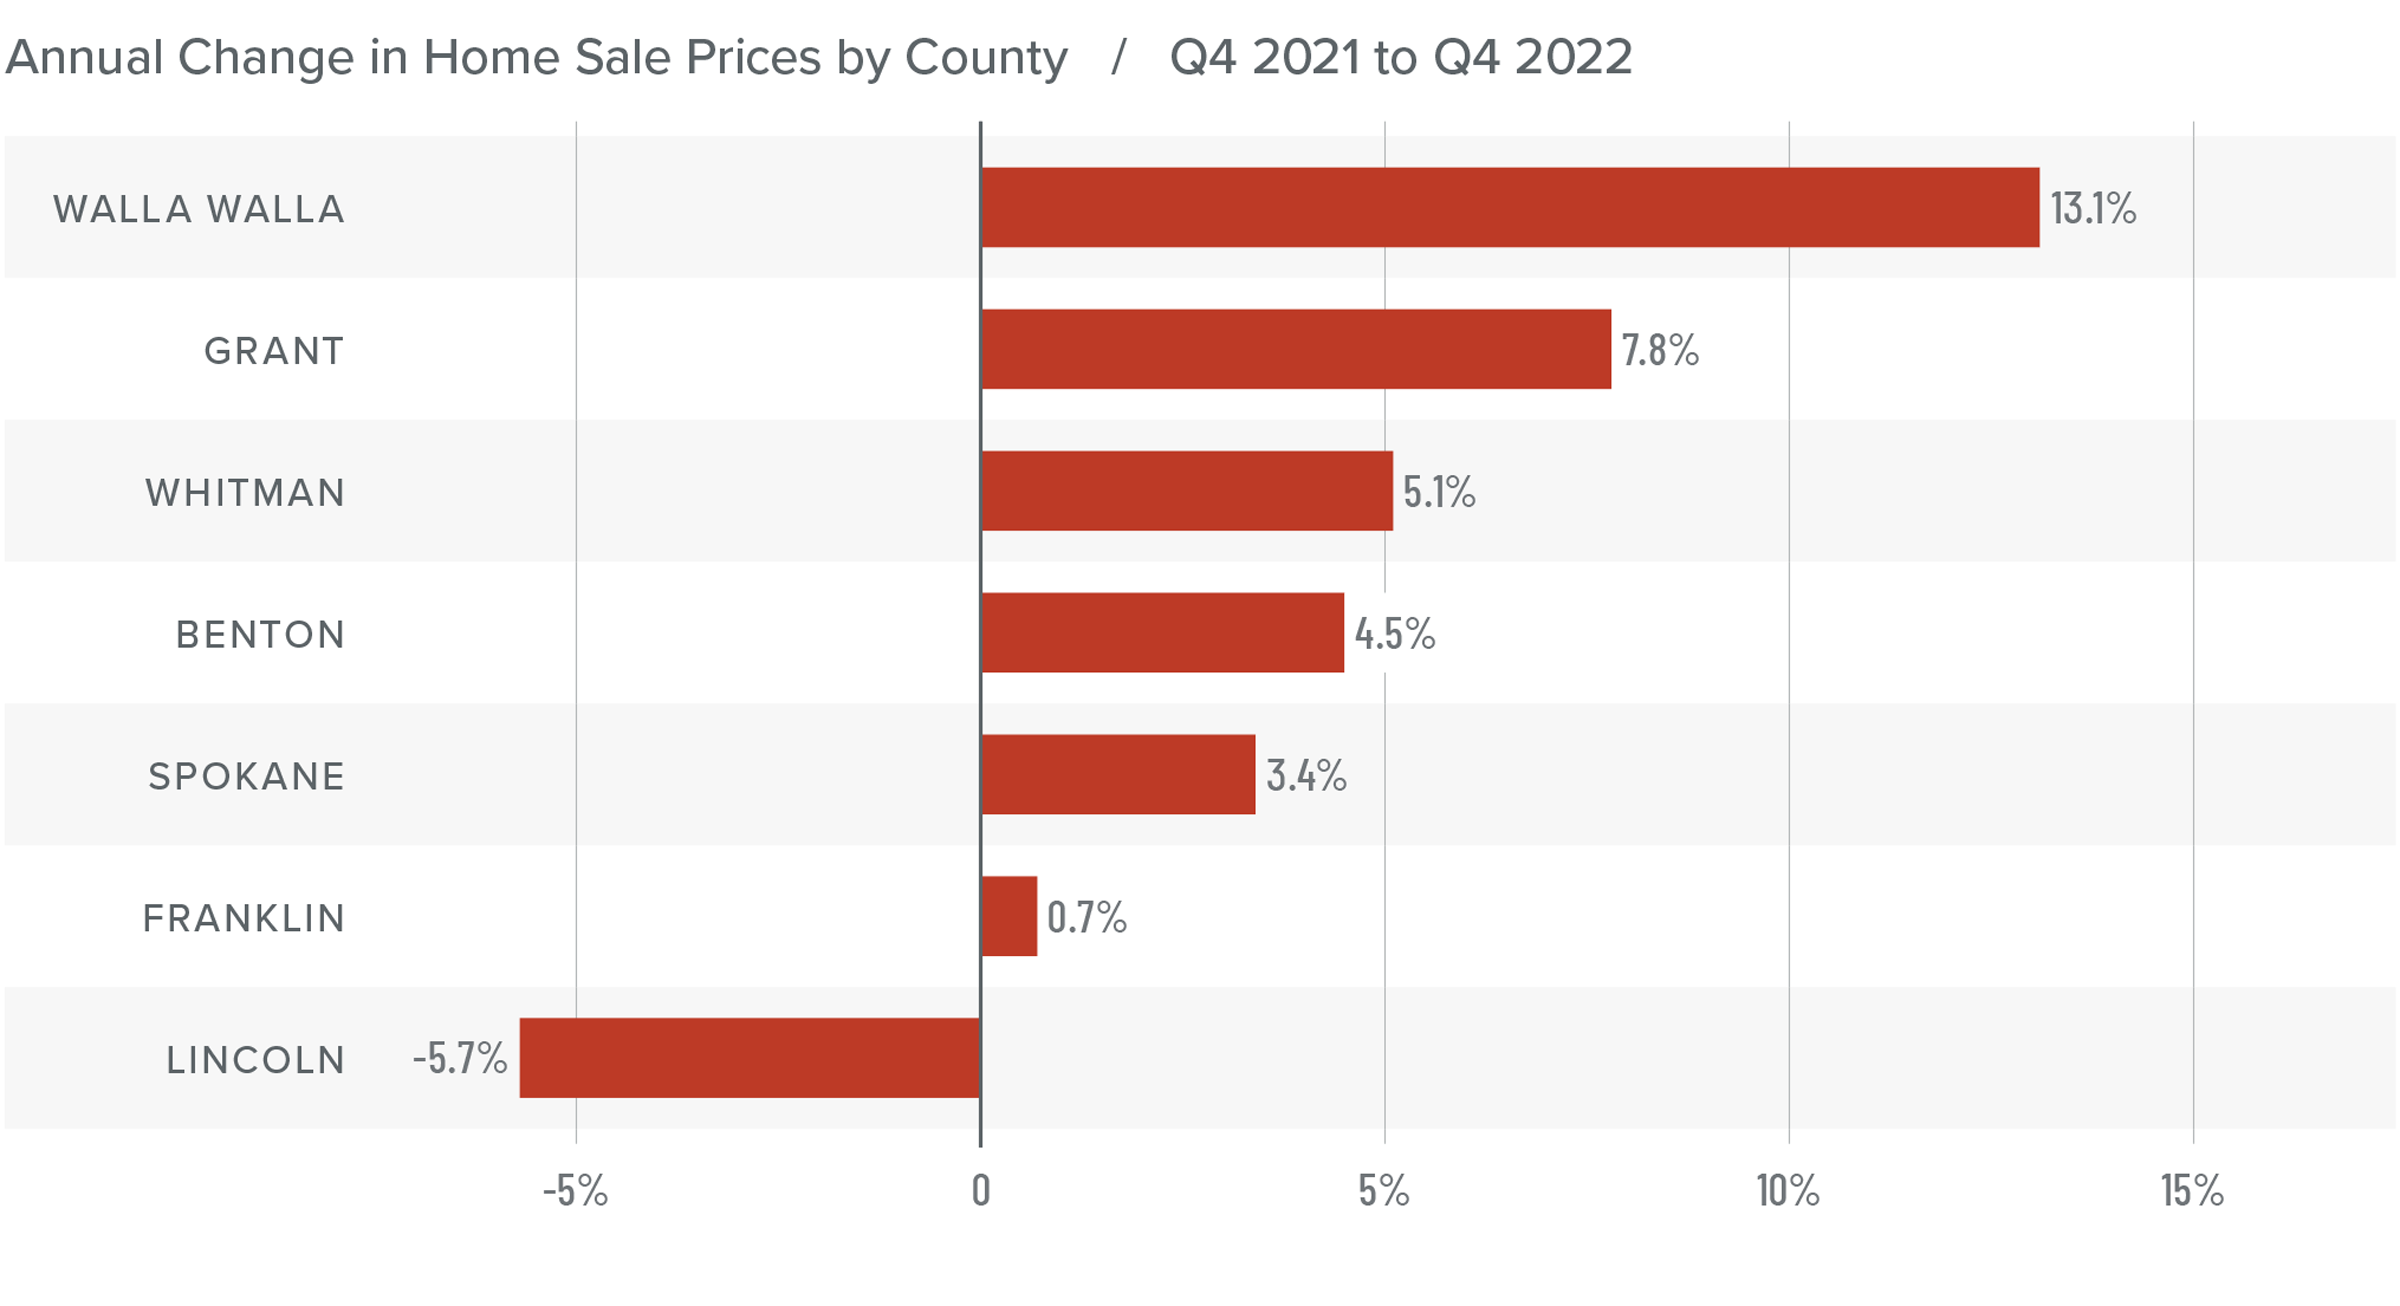 A bar graph showing the annual change in home sale prices for various counties in Eastern Washington from Q4 2021 to Q4 2022. Walla Walla County tops the list at 13.1%, followed by Grant at 7.8%, Whitman at 5.1%, Benton at 4.5%, Spokane at 3.4%, Franklin at 0.7%, and Lincoln at -5.7%.